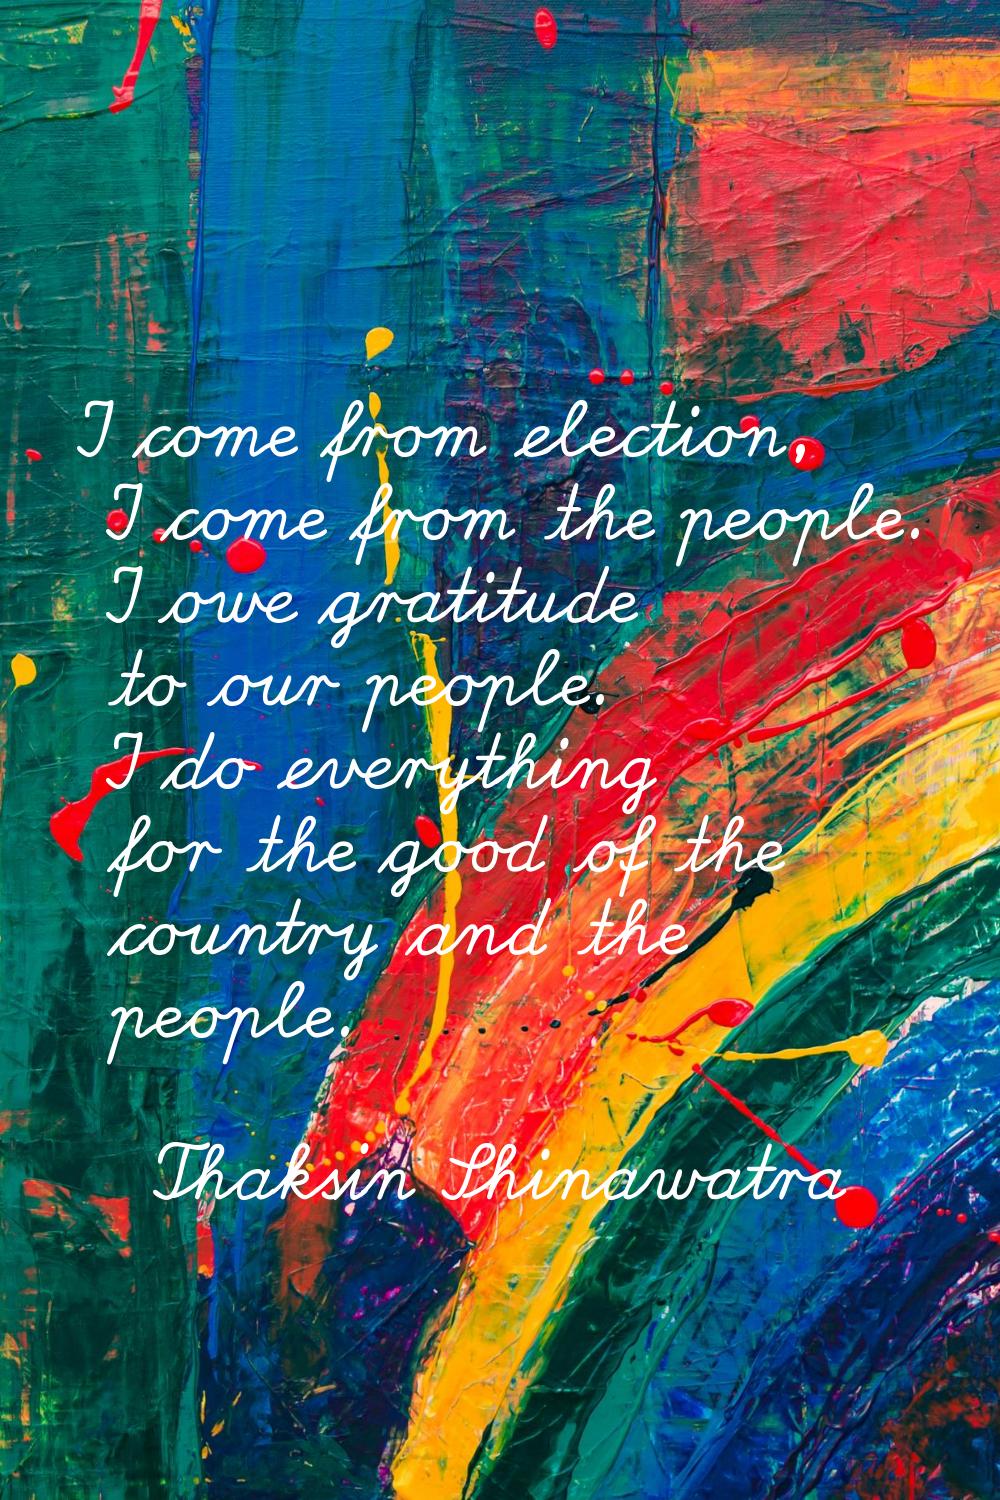 I come from election, I come from the people. I owe gratitude to our people. I do everything for th